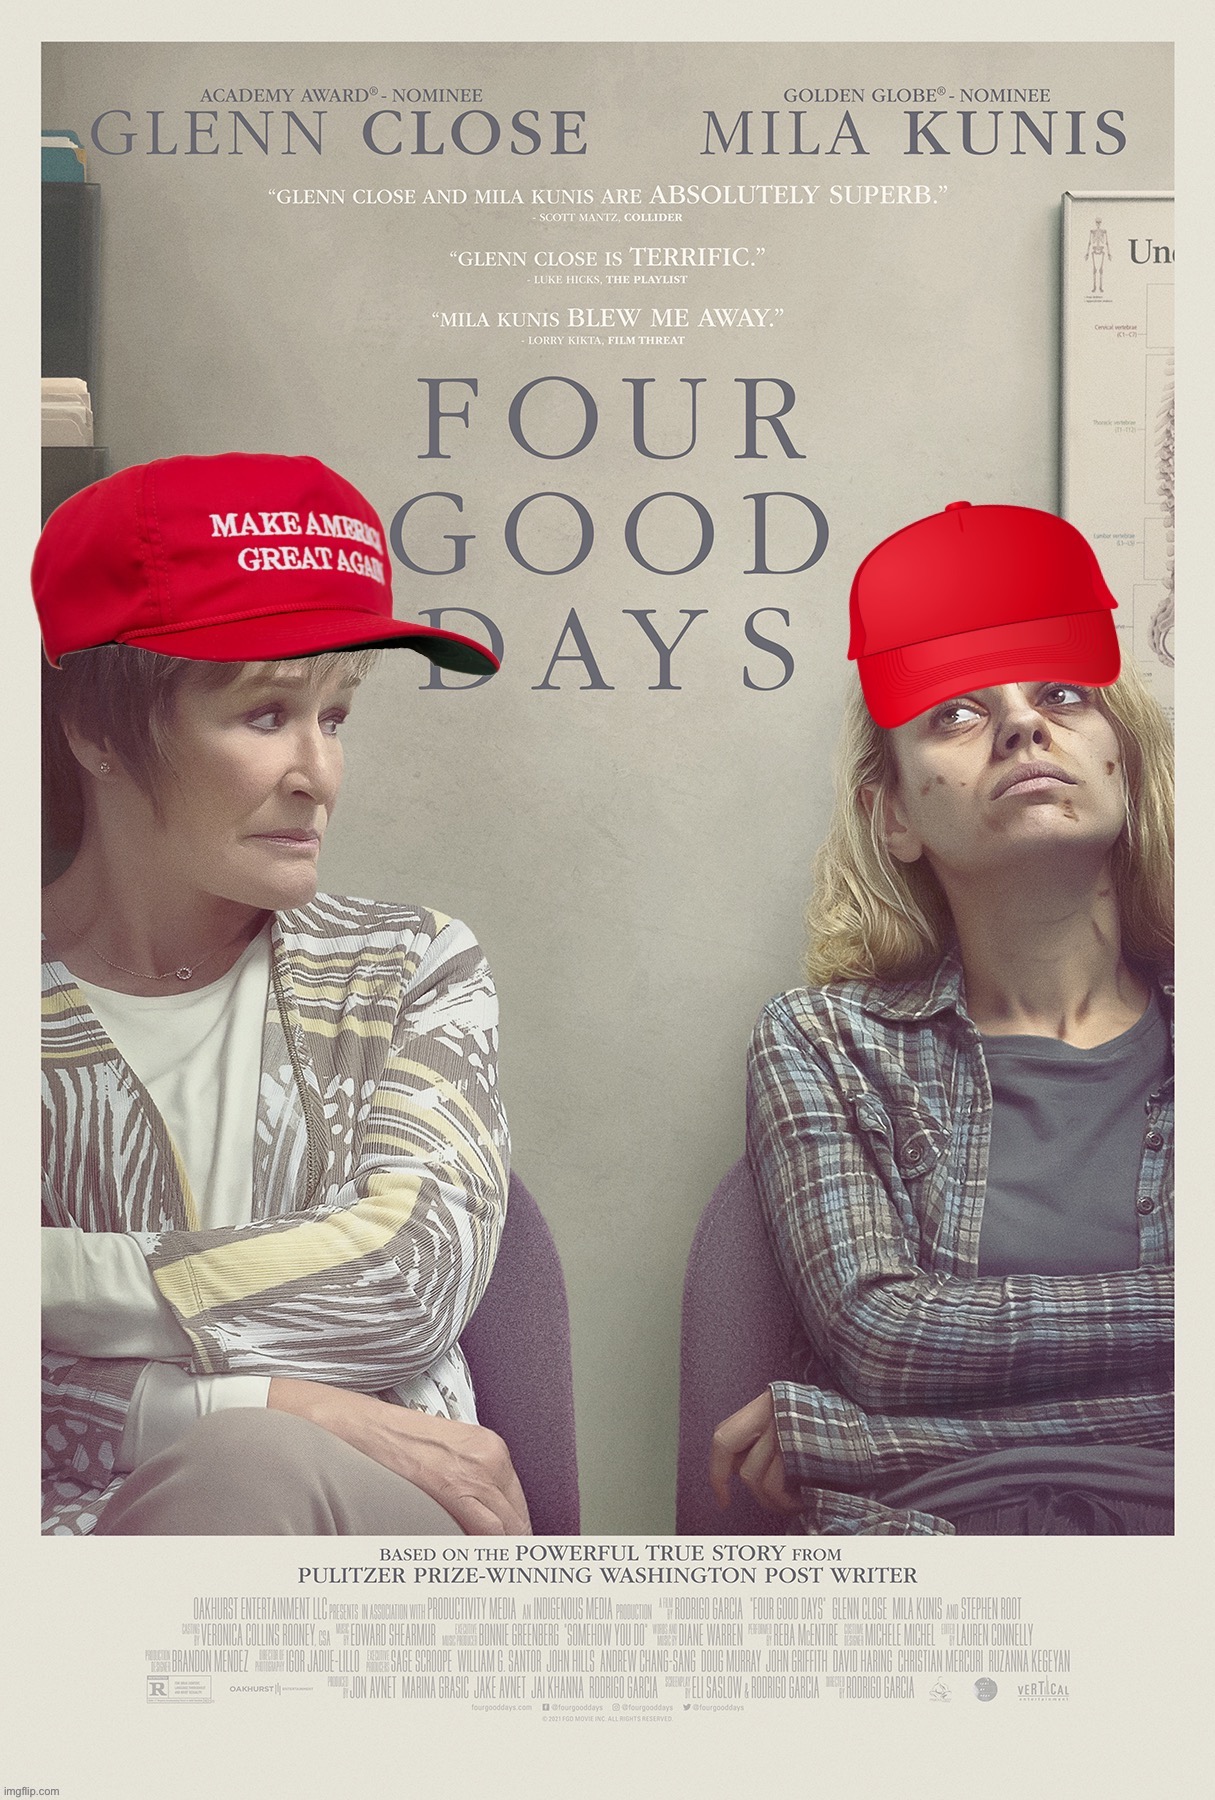 4 good days thats all were askin. & we can have trump again. believe | image tagged in trump four good days,4 good days,maga,trump inauguration,mike lindell,believe | made w/ Imgflip meme maker